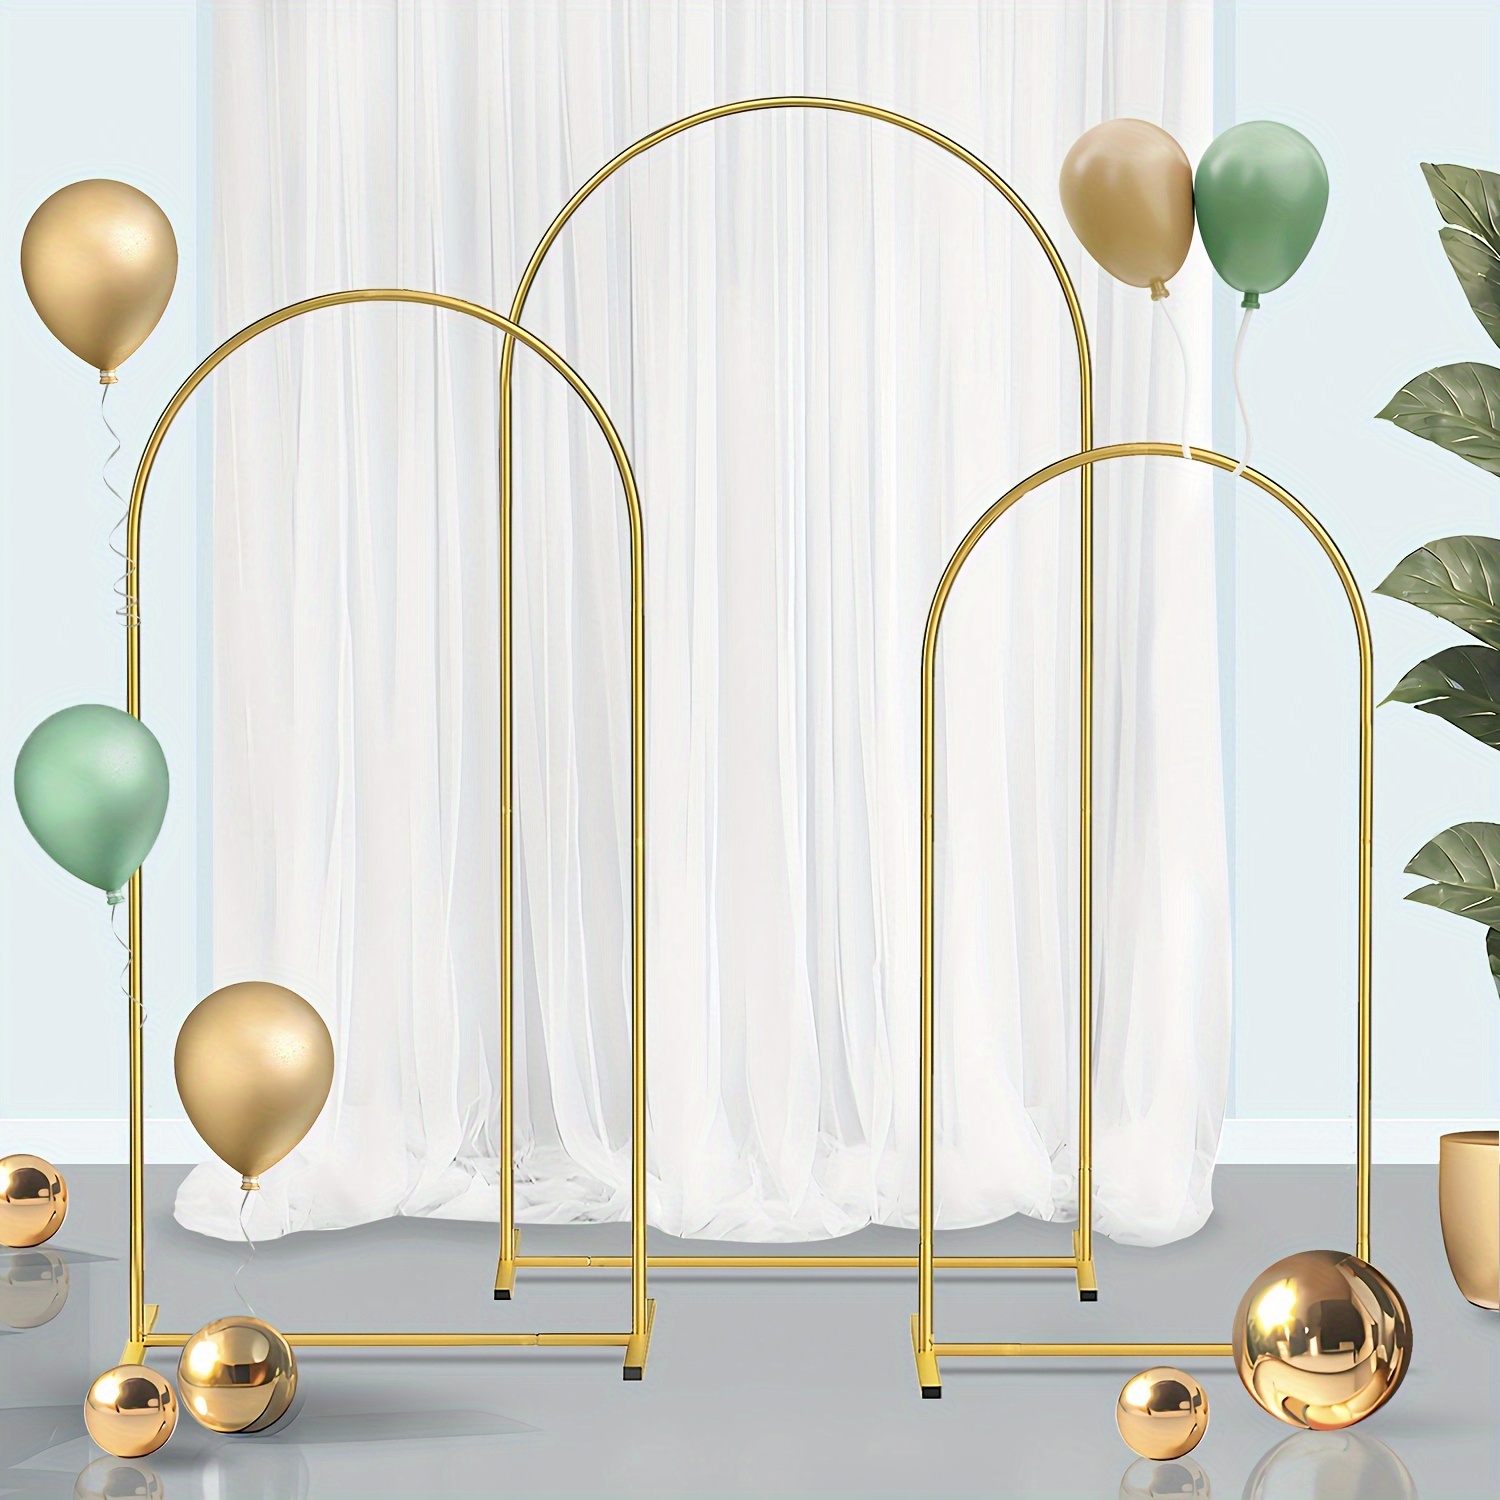 

1pc, Metal Arch Backdrop Stand, Golden Wedding Balloon Arched Backdrop Stand Arch Frame For Birthday Party Bridal Baby Shower Ceremony Decoration, 6ft/6.6ft/7.2ft